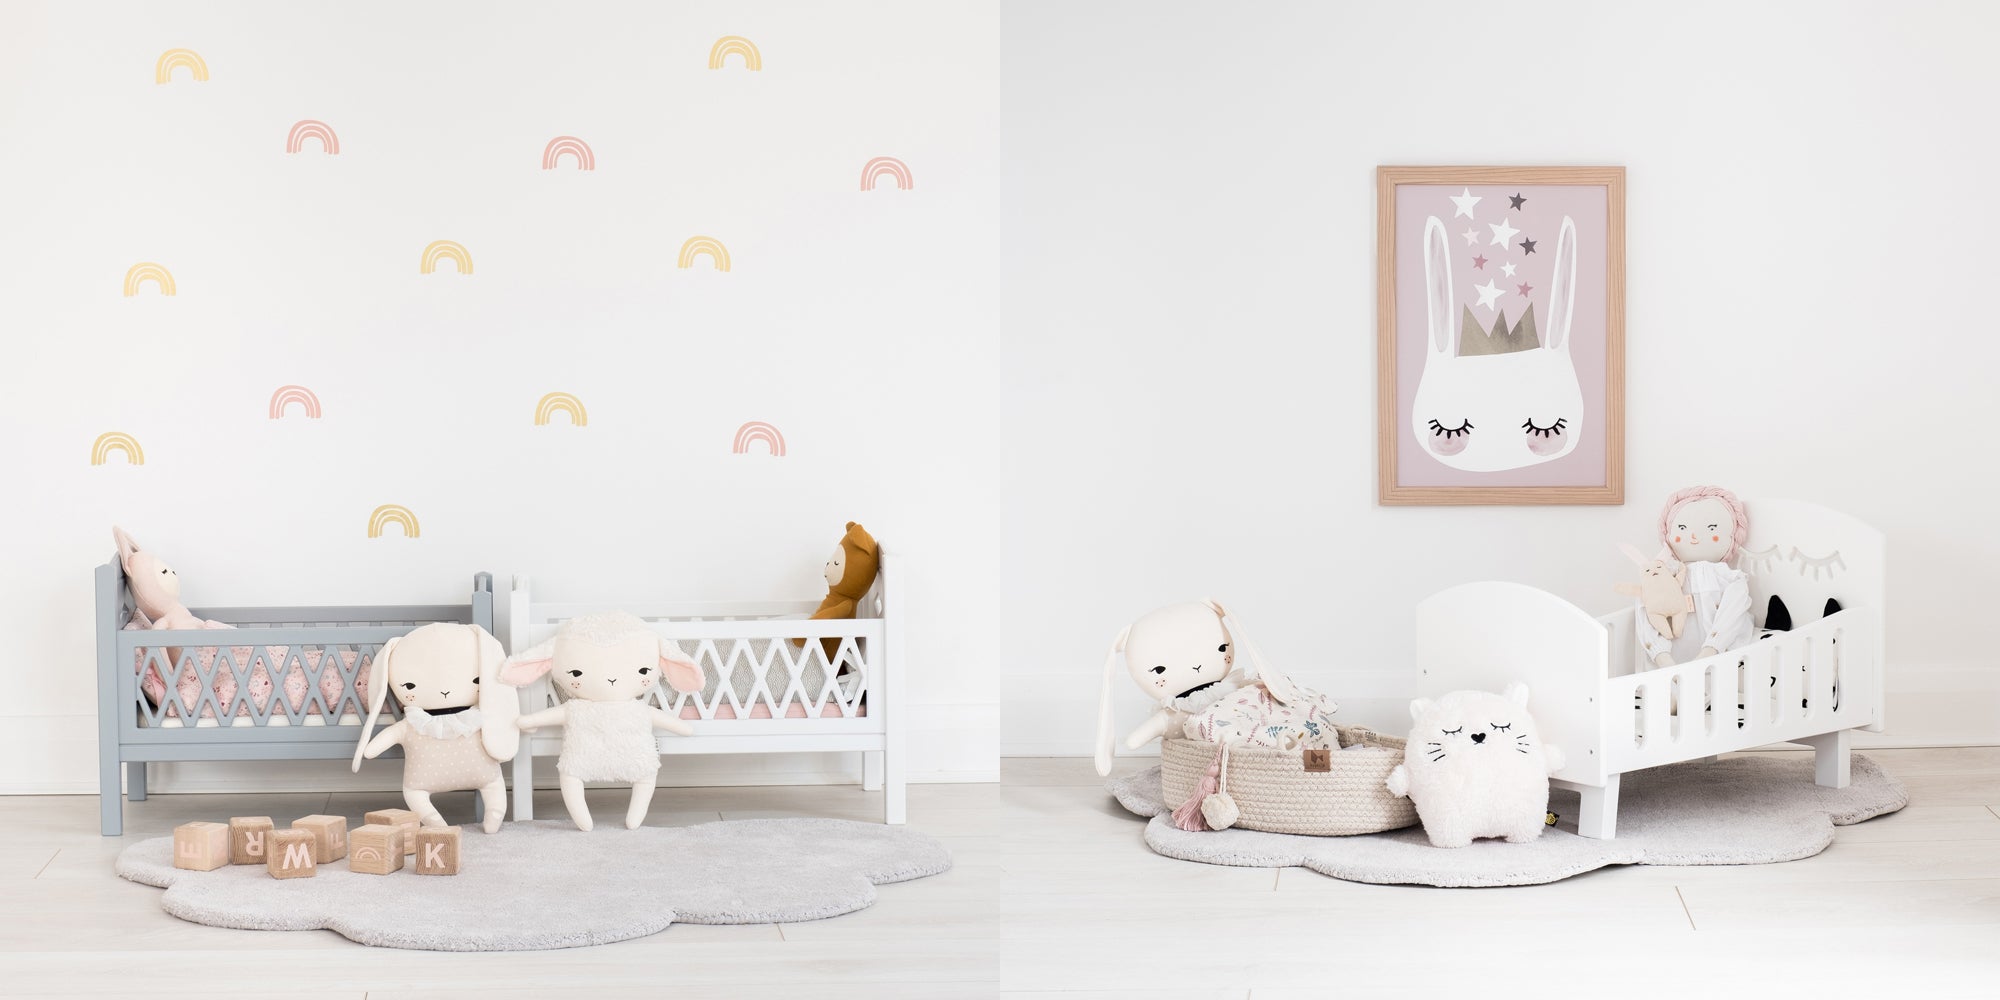 Dolls Beds and Carry Cots, available at Bobby Rabbit.